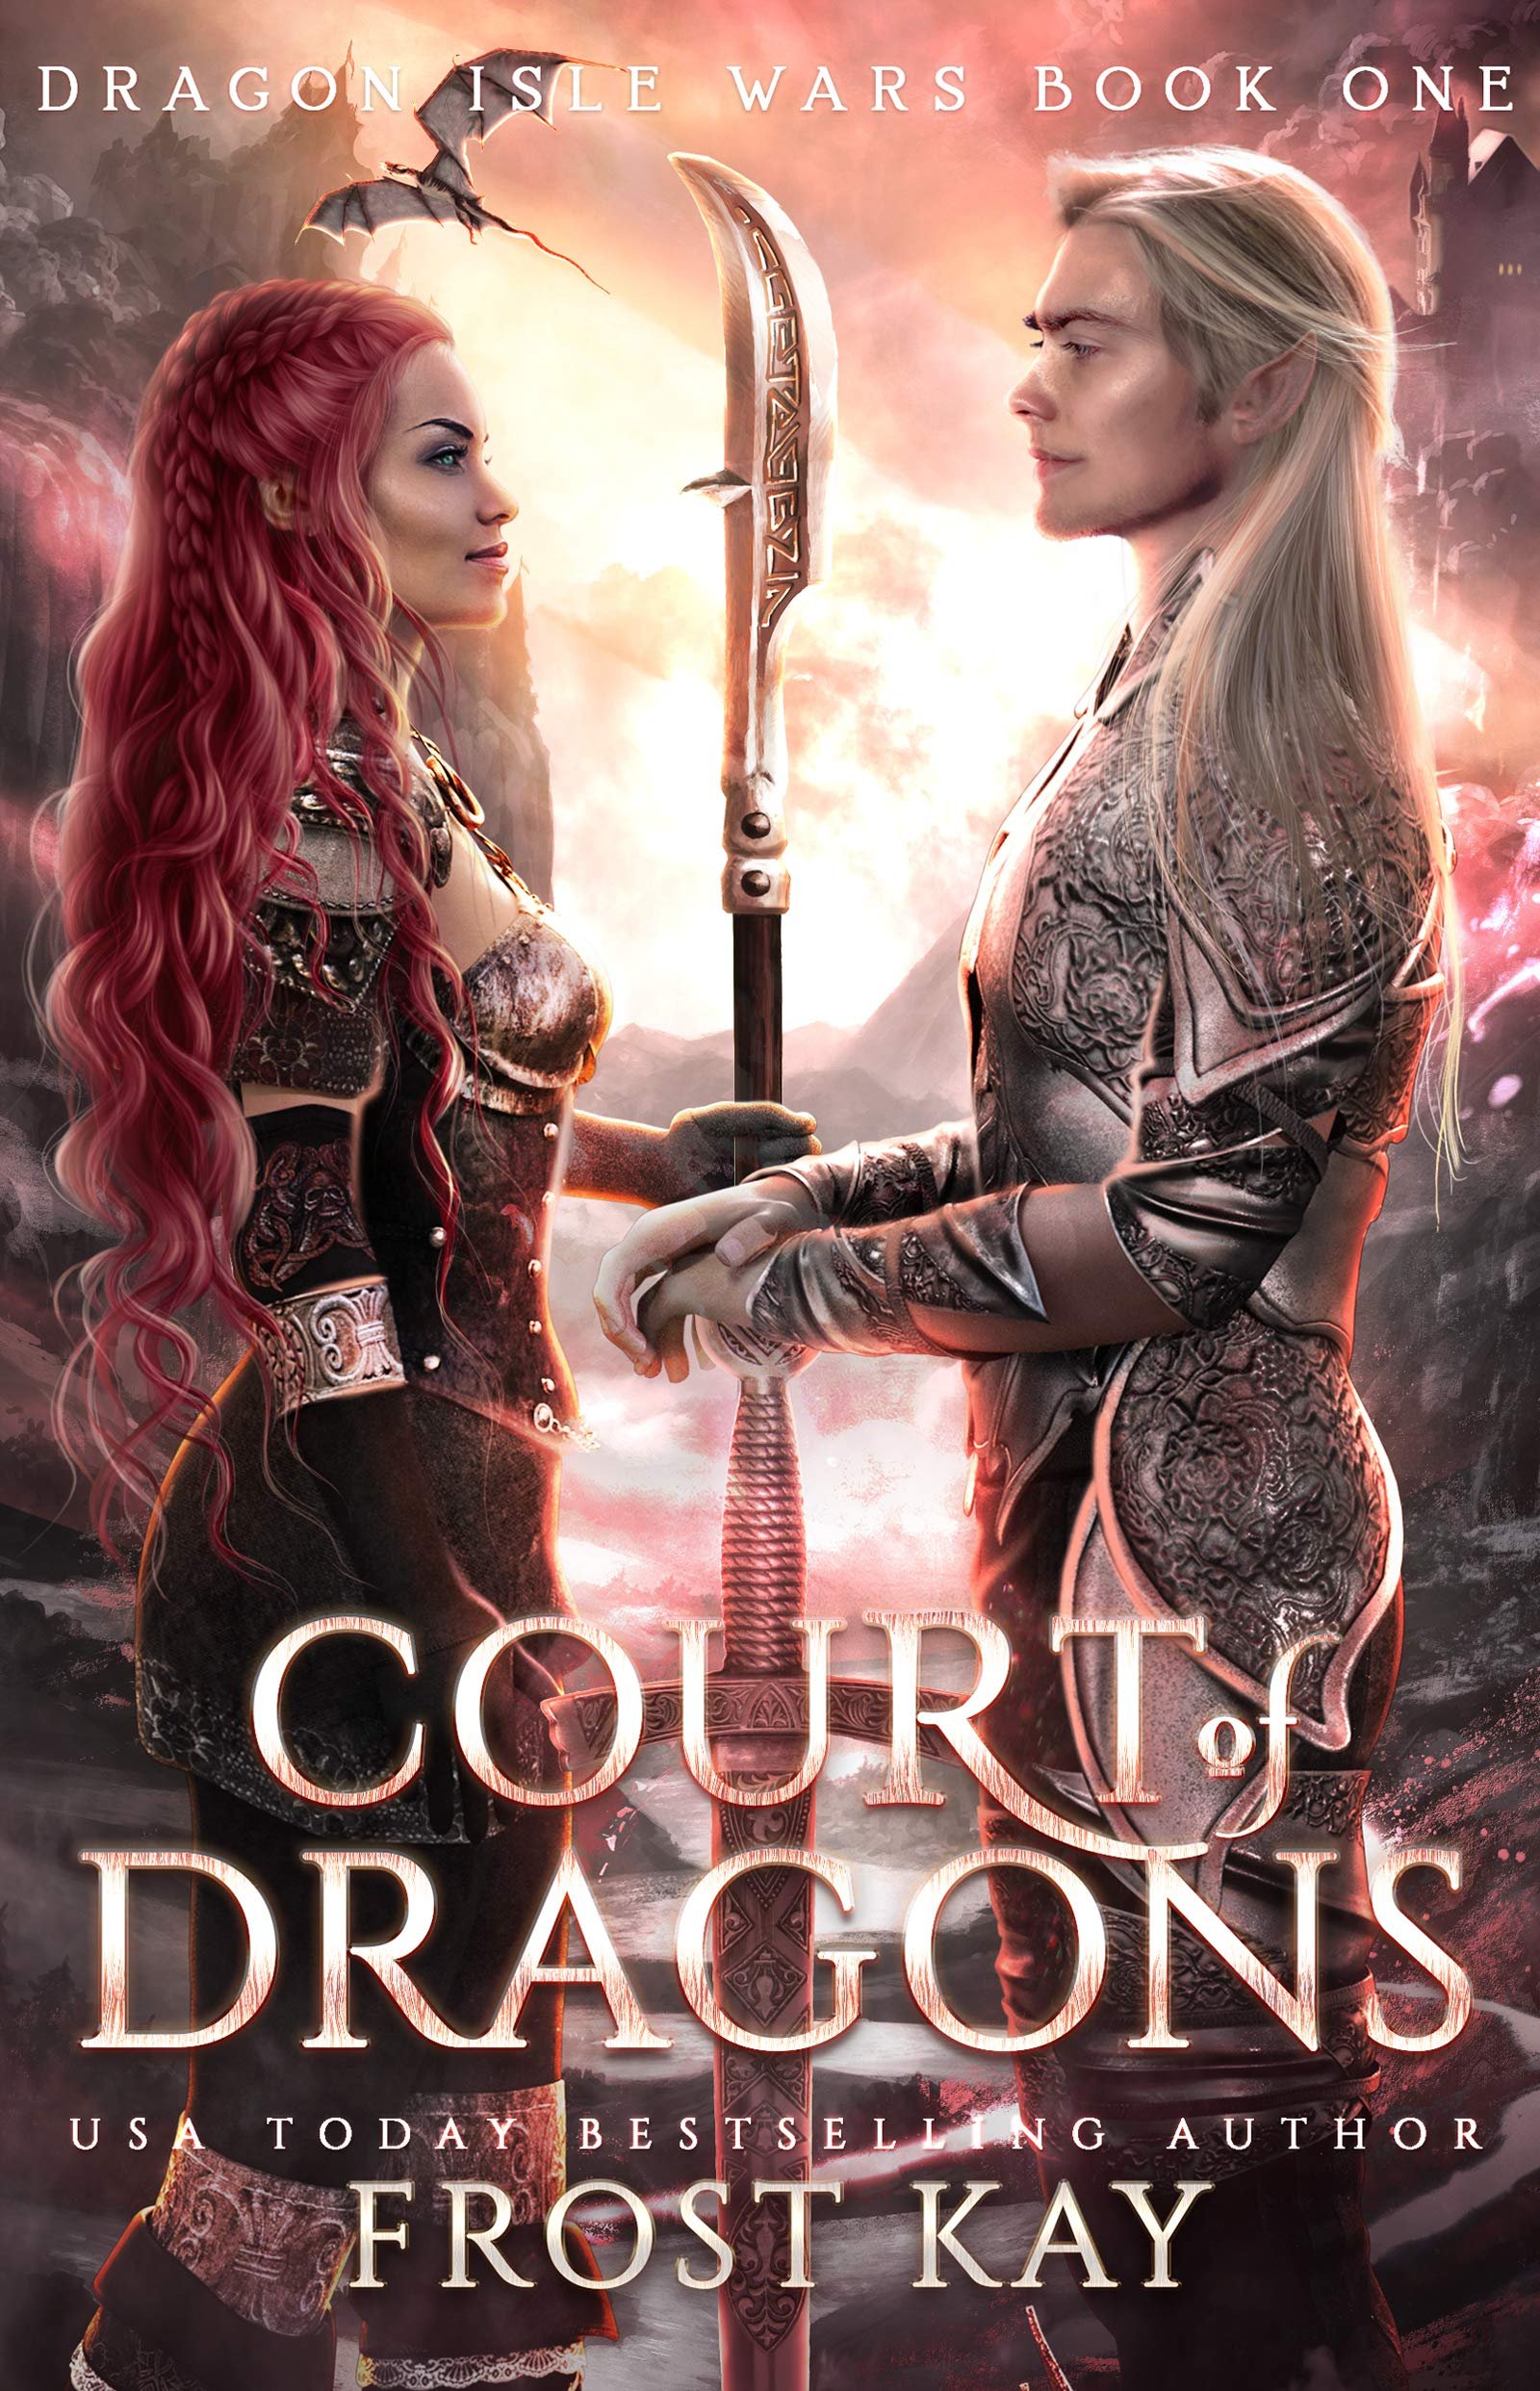 Court of Dragons (Dragon Isle Wars Book 1) Cover